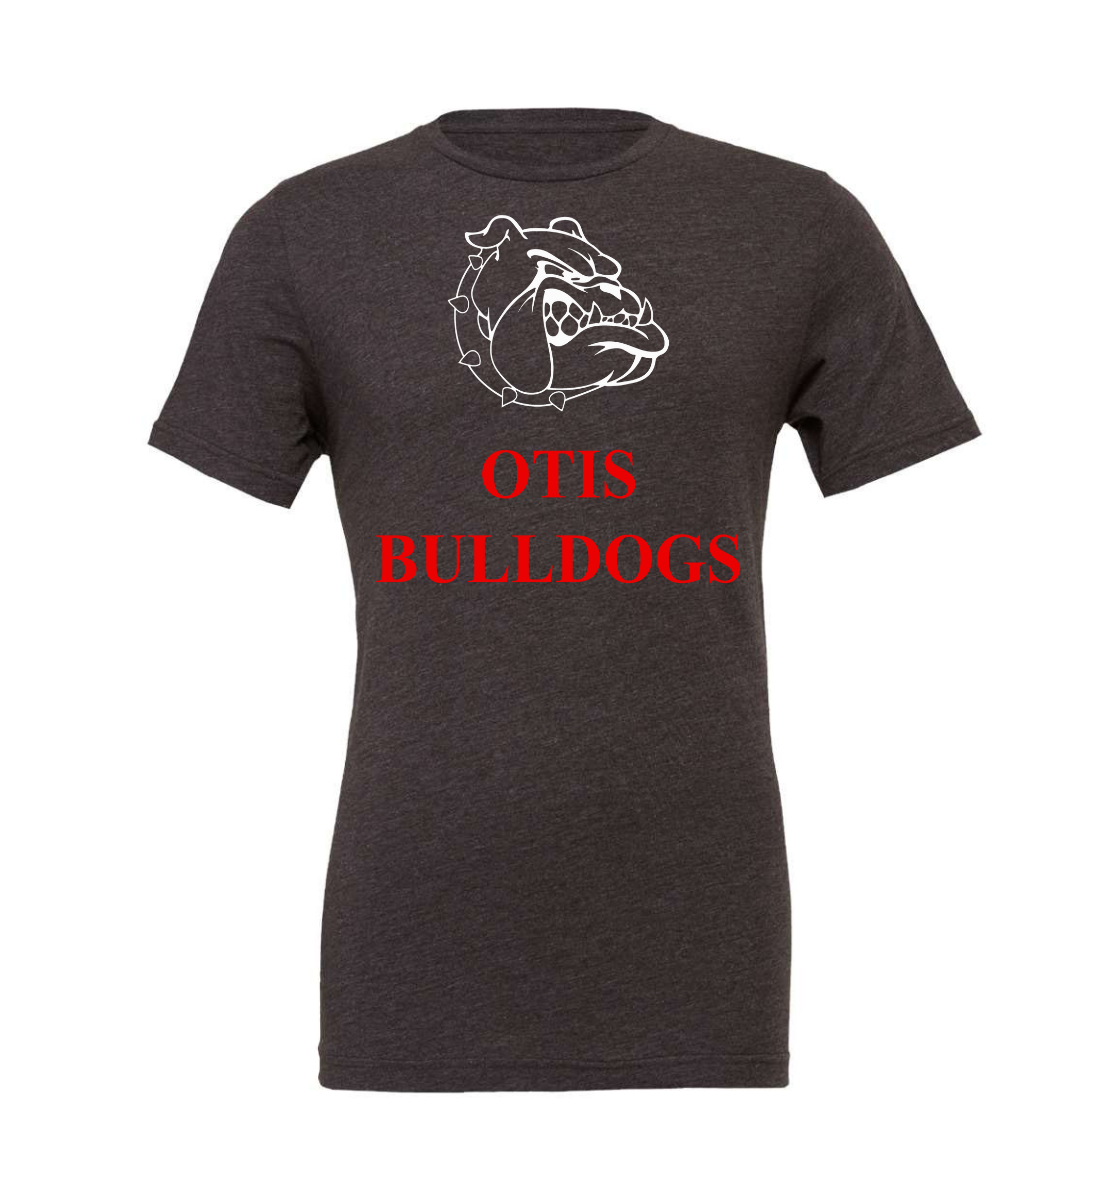 otis bulldogs youth t-shirt: for young otis bulldogs fans only!